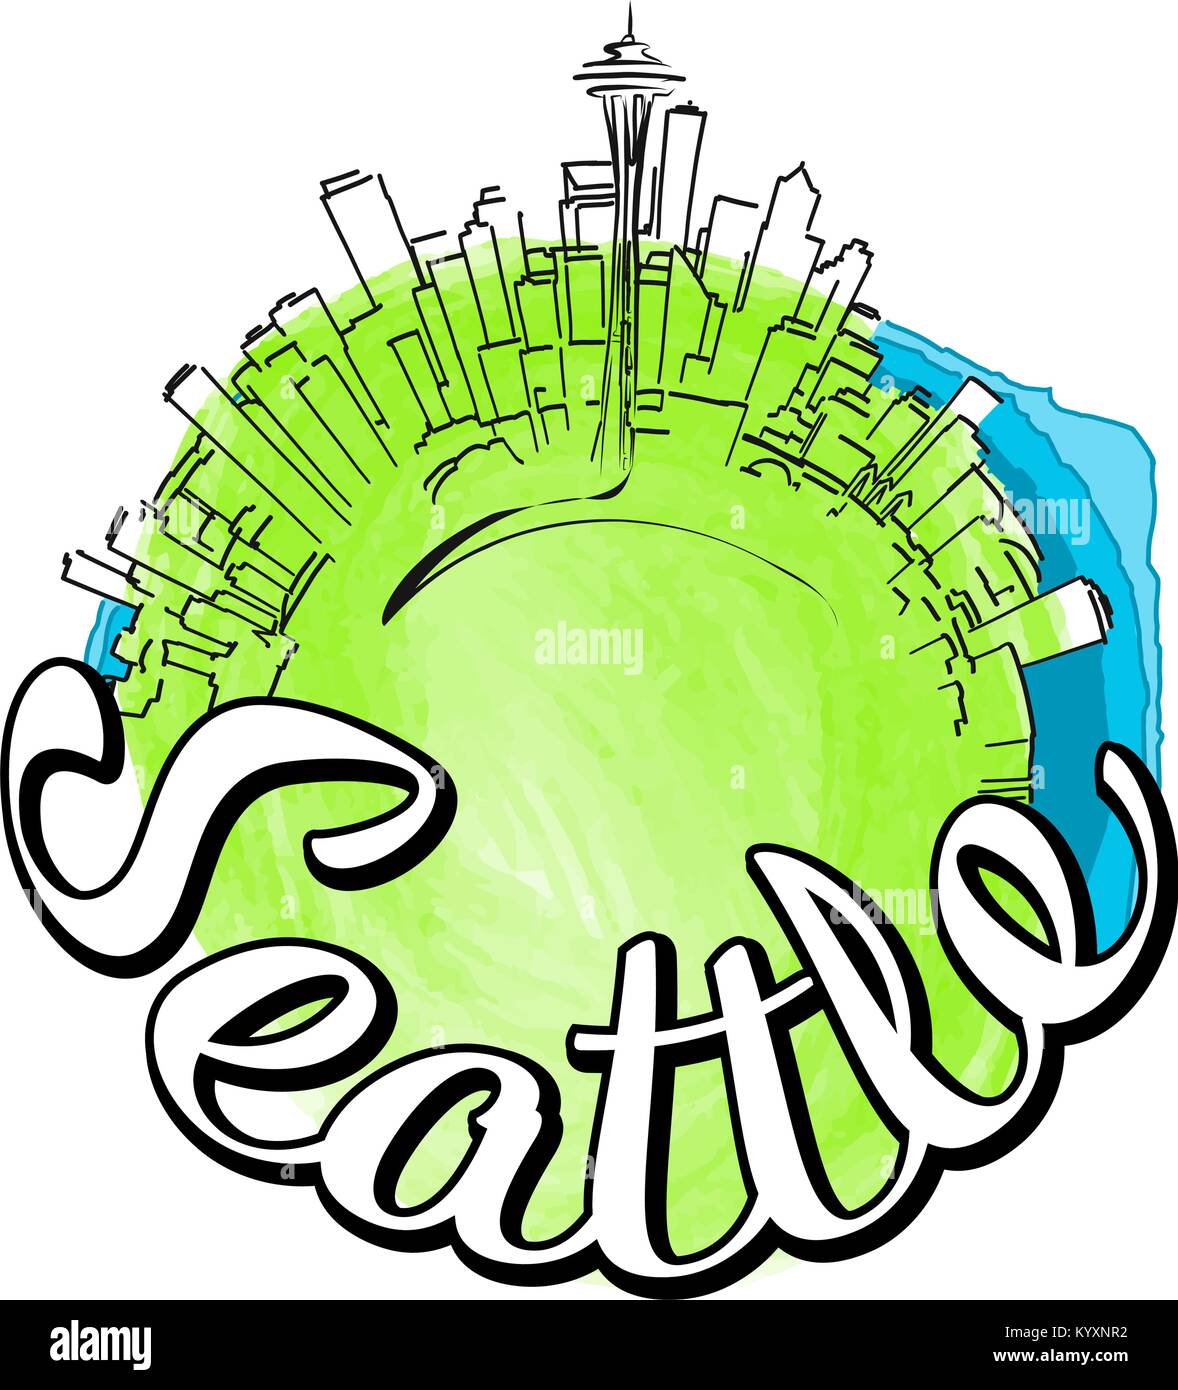 Seattle travel logo sketch. Colored skyline vector illustration with watercolor background and typo. Stock Vector